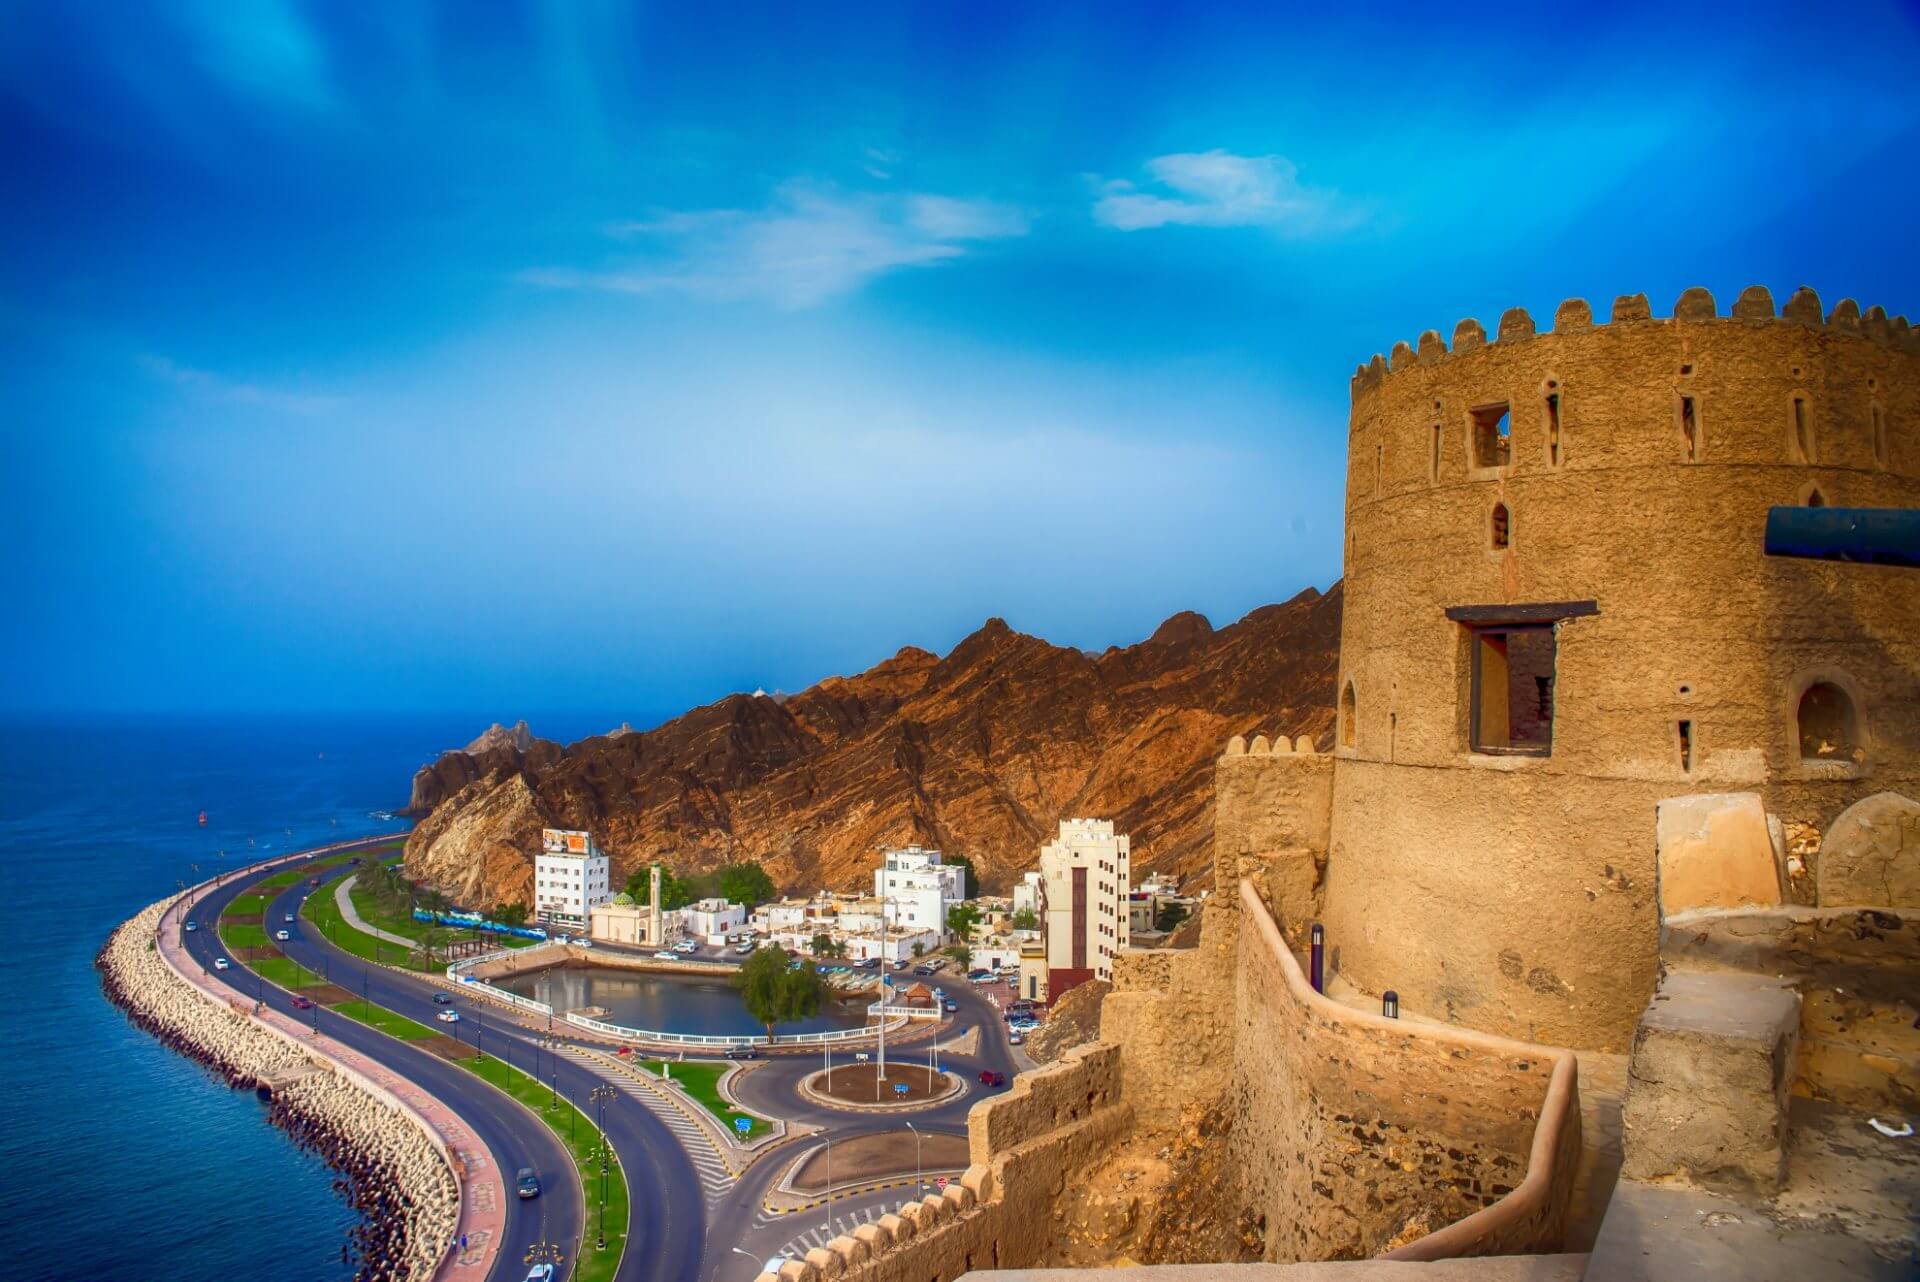 DISCOVER OF OMAN